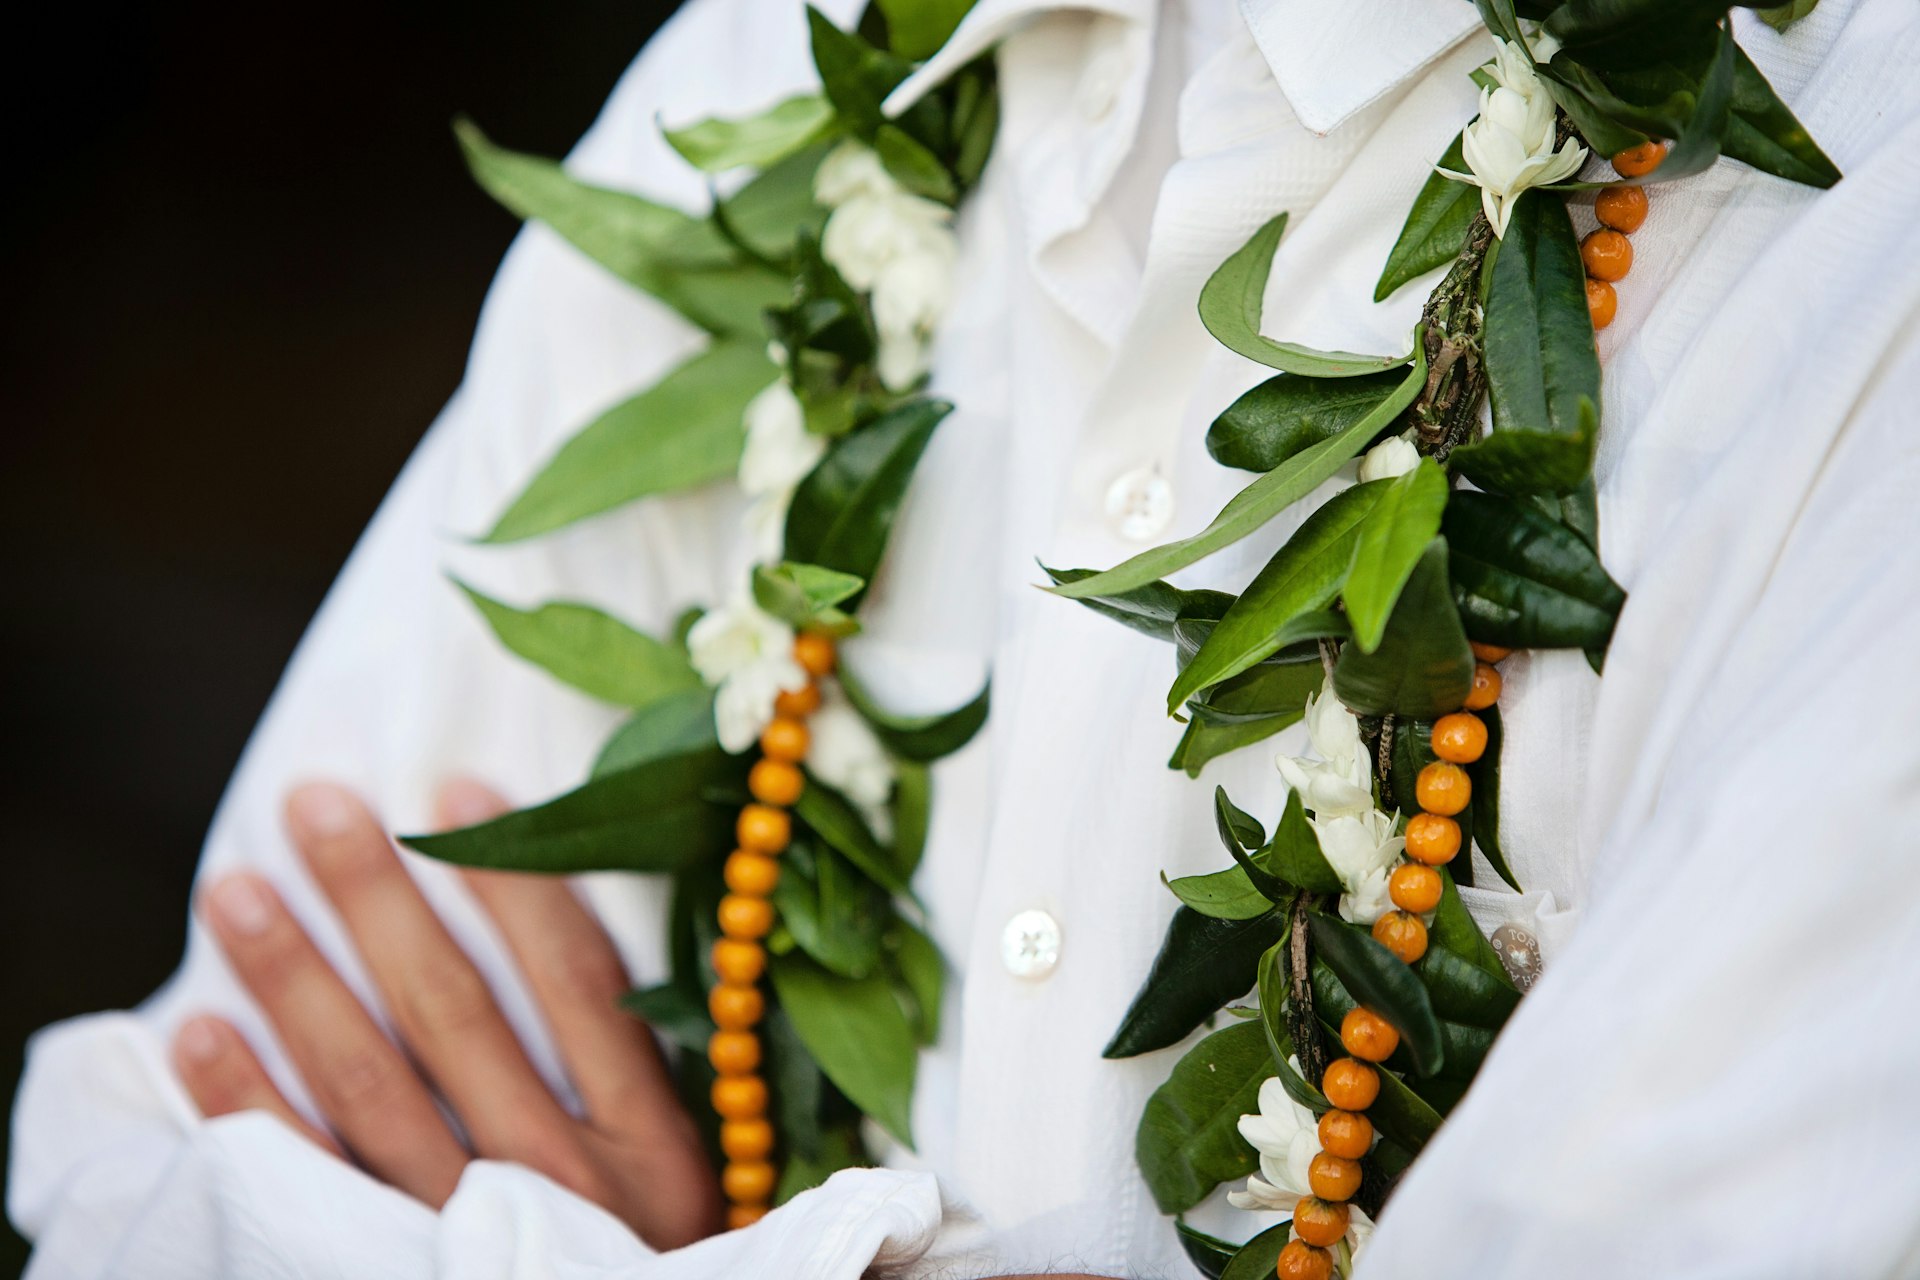 A garland of beads, white flowers and green leaves worn around someone's neck